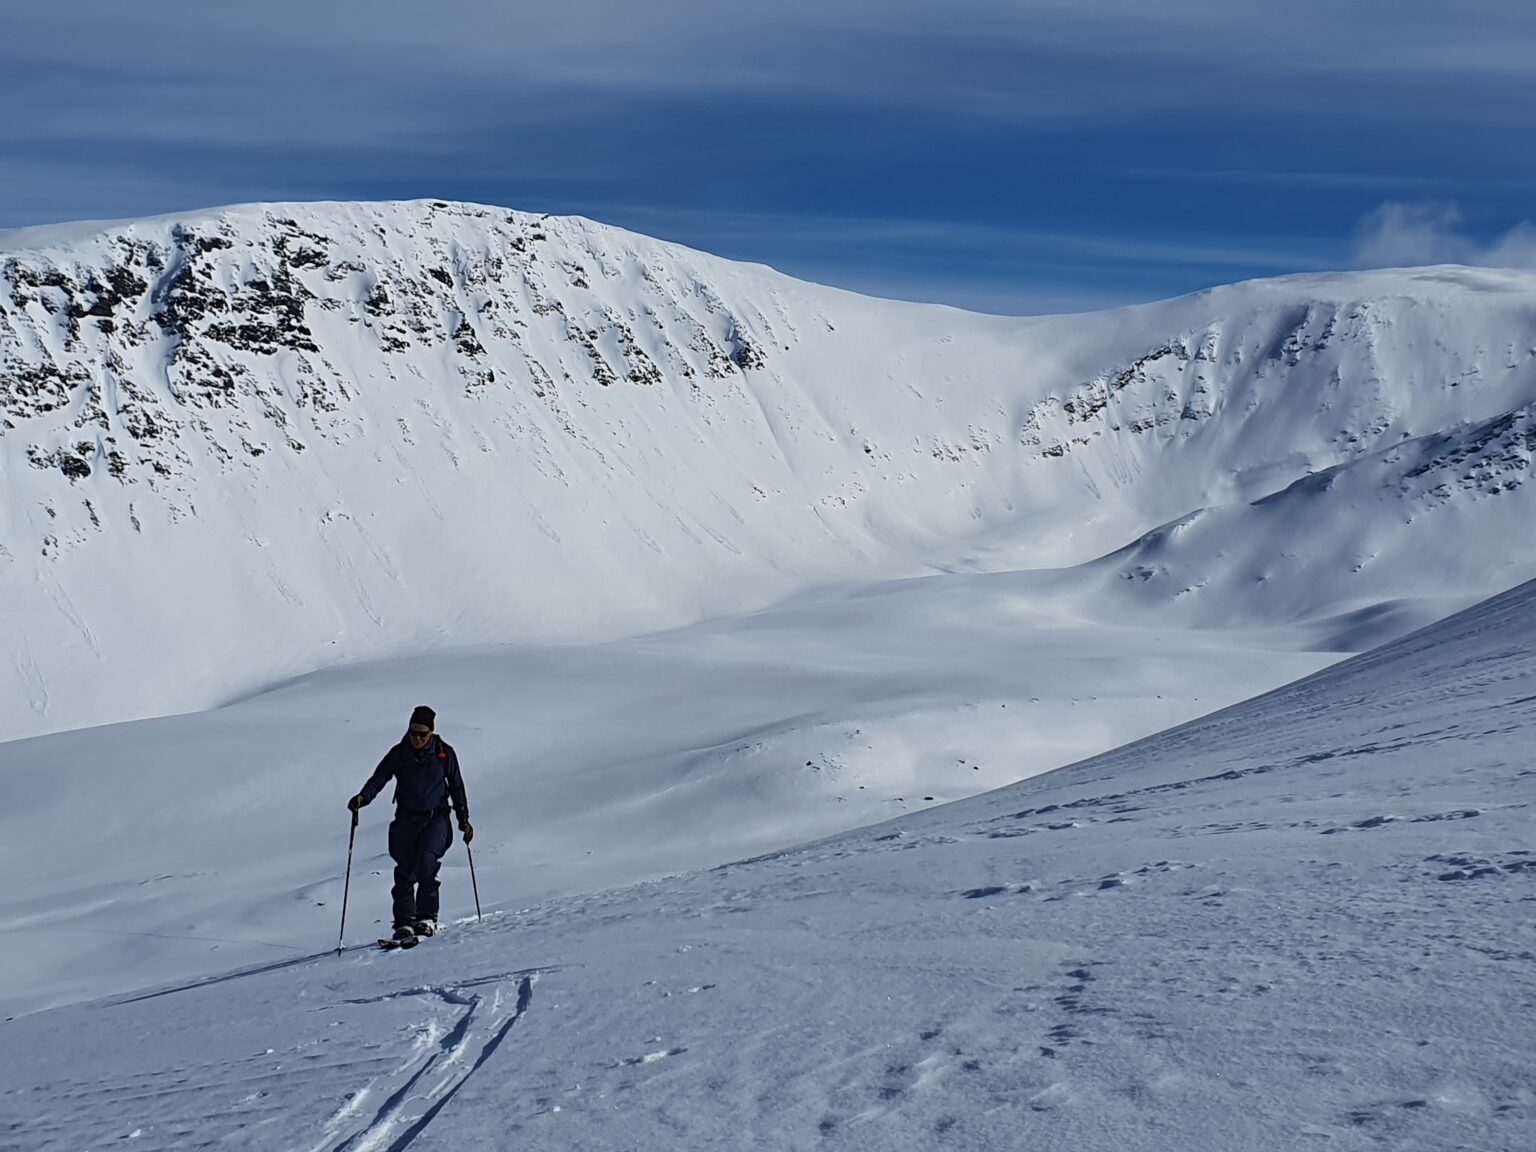 Ski touring past the crux zone of Istinden with the Tamok Husset backyard in the background